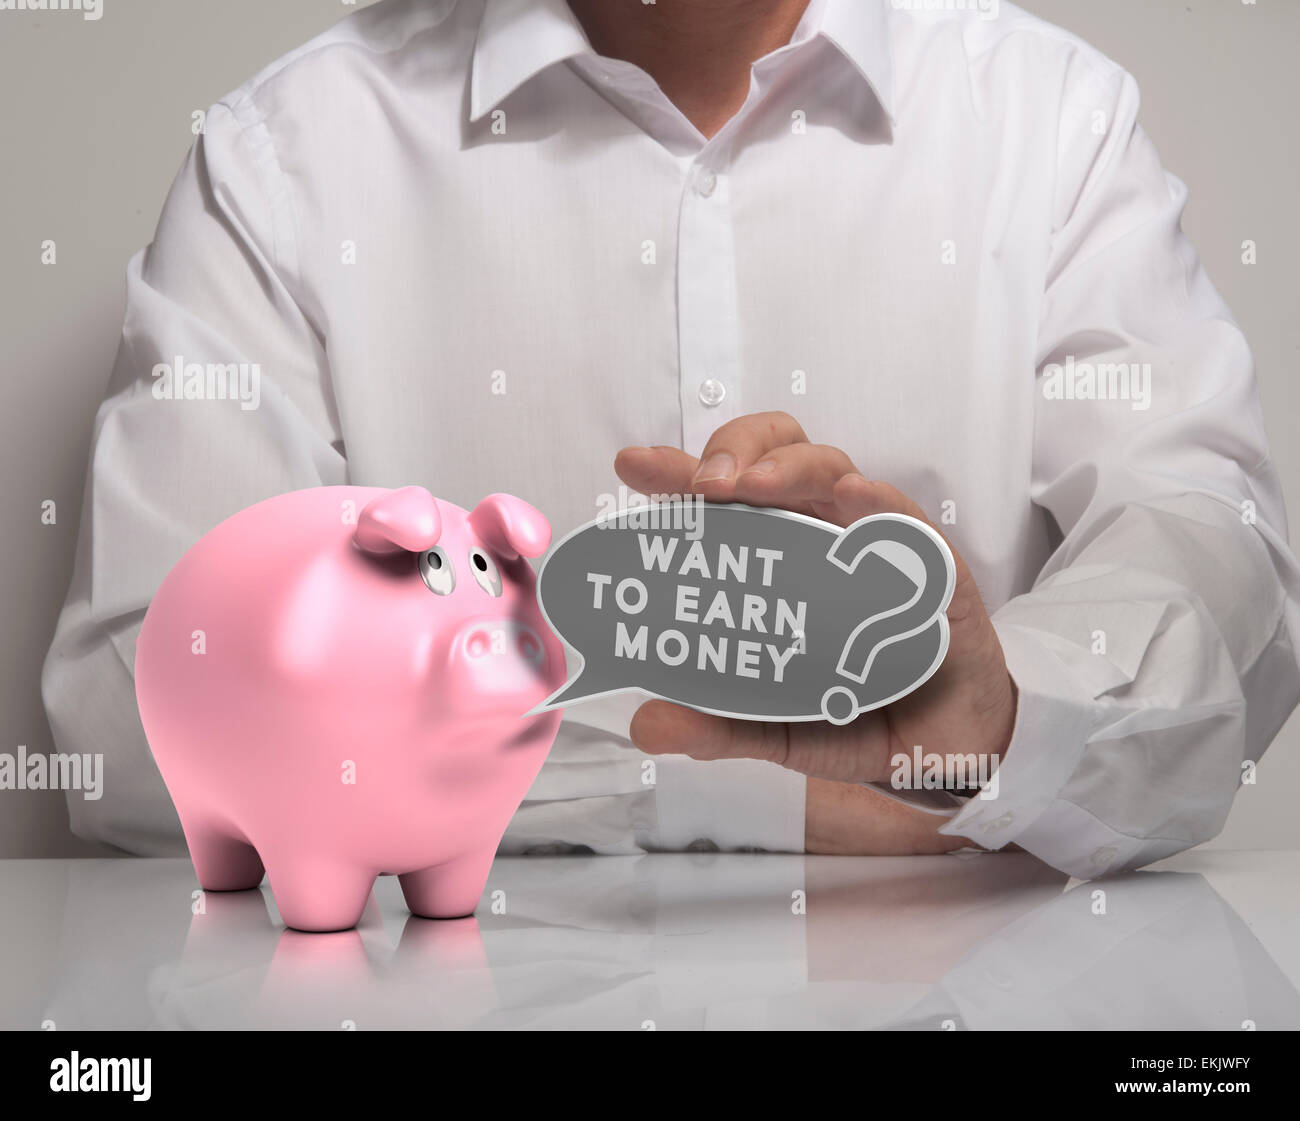 Image of a man hand holding speech balloon with the text want to earn money and pink piggy bank, white shirt. Concept for money Stock Photo